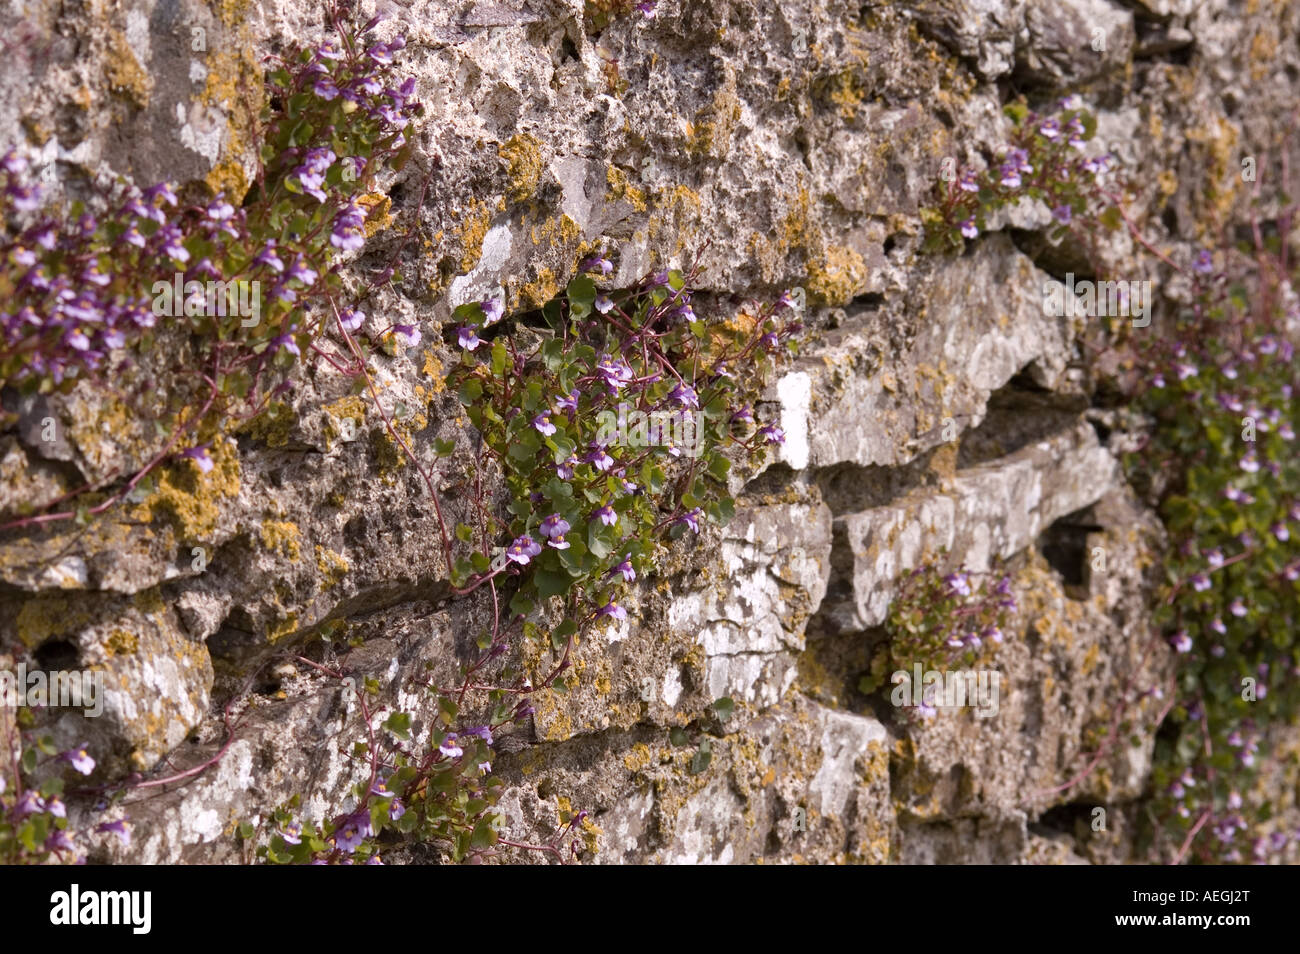 ivy leaved toadflax cymbalaria muralis clinging to and growing out of stone wall number 2497 Stock Photo